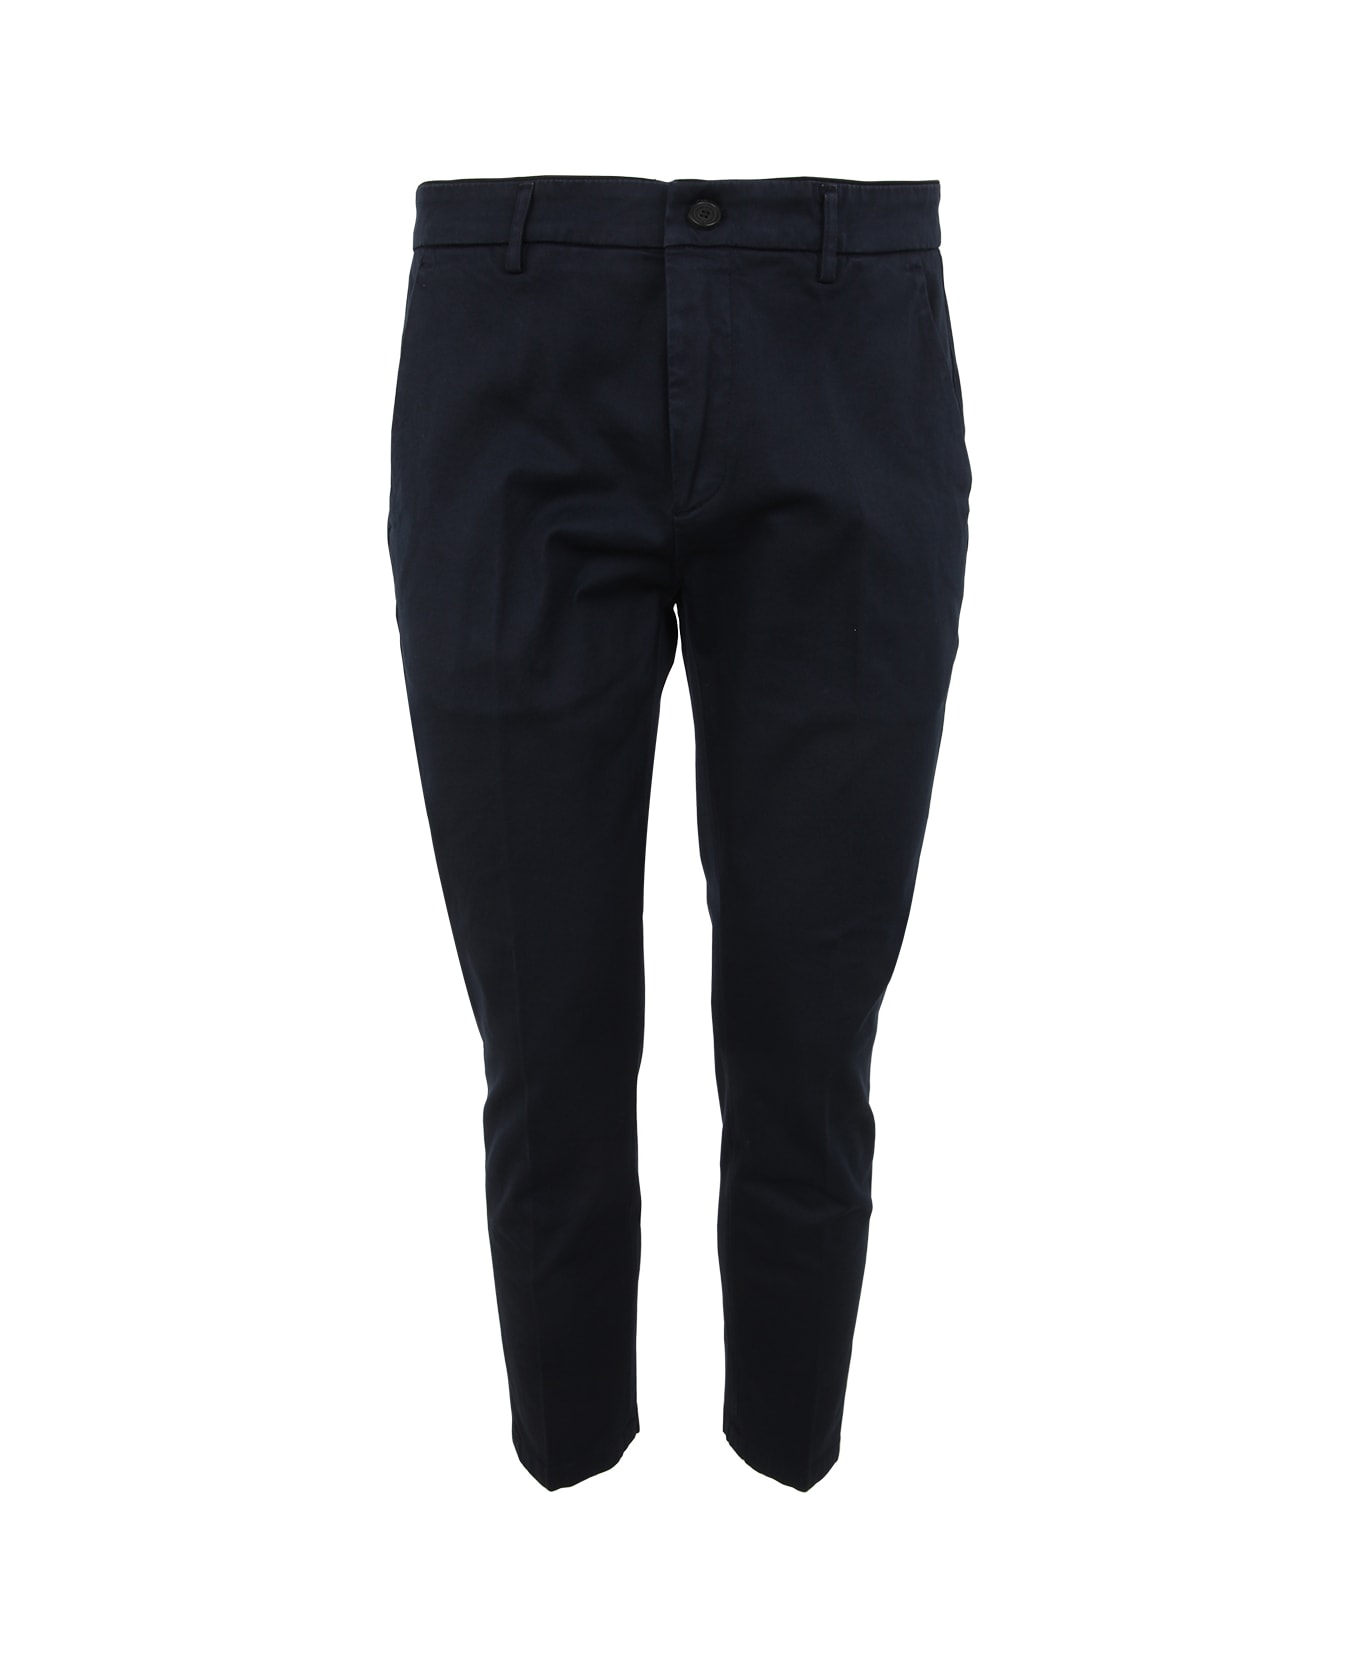 Department Five Prince Chinos Crop Trousers - Navy